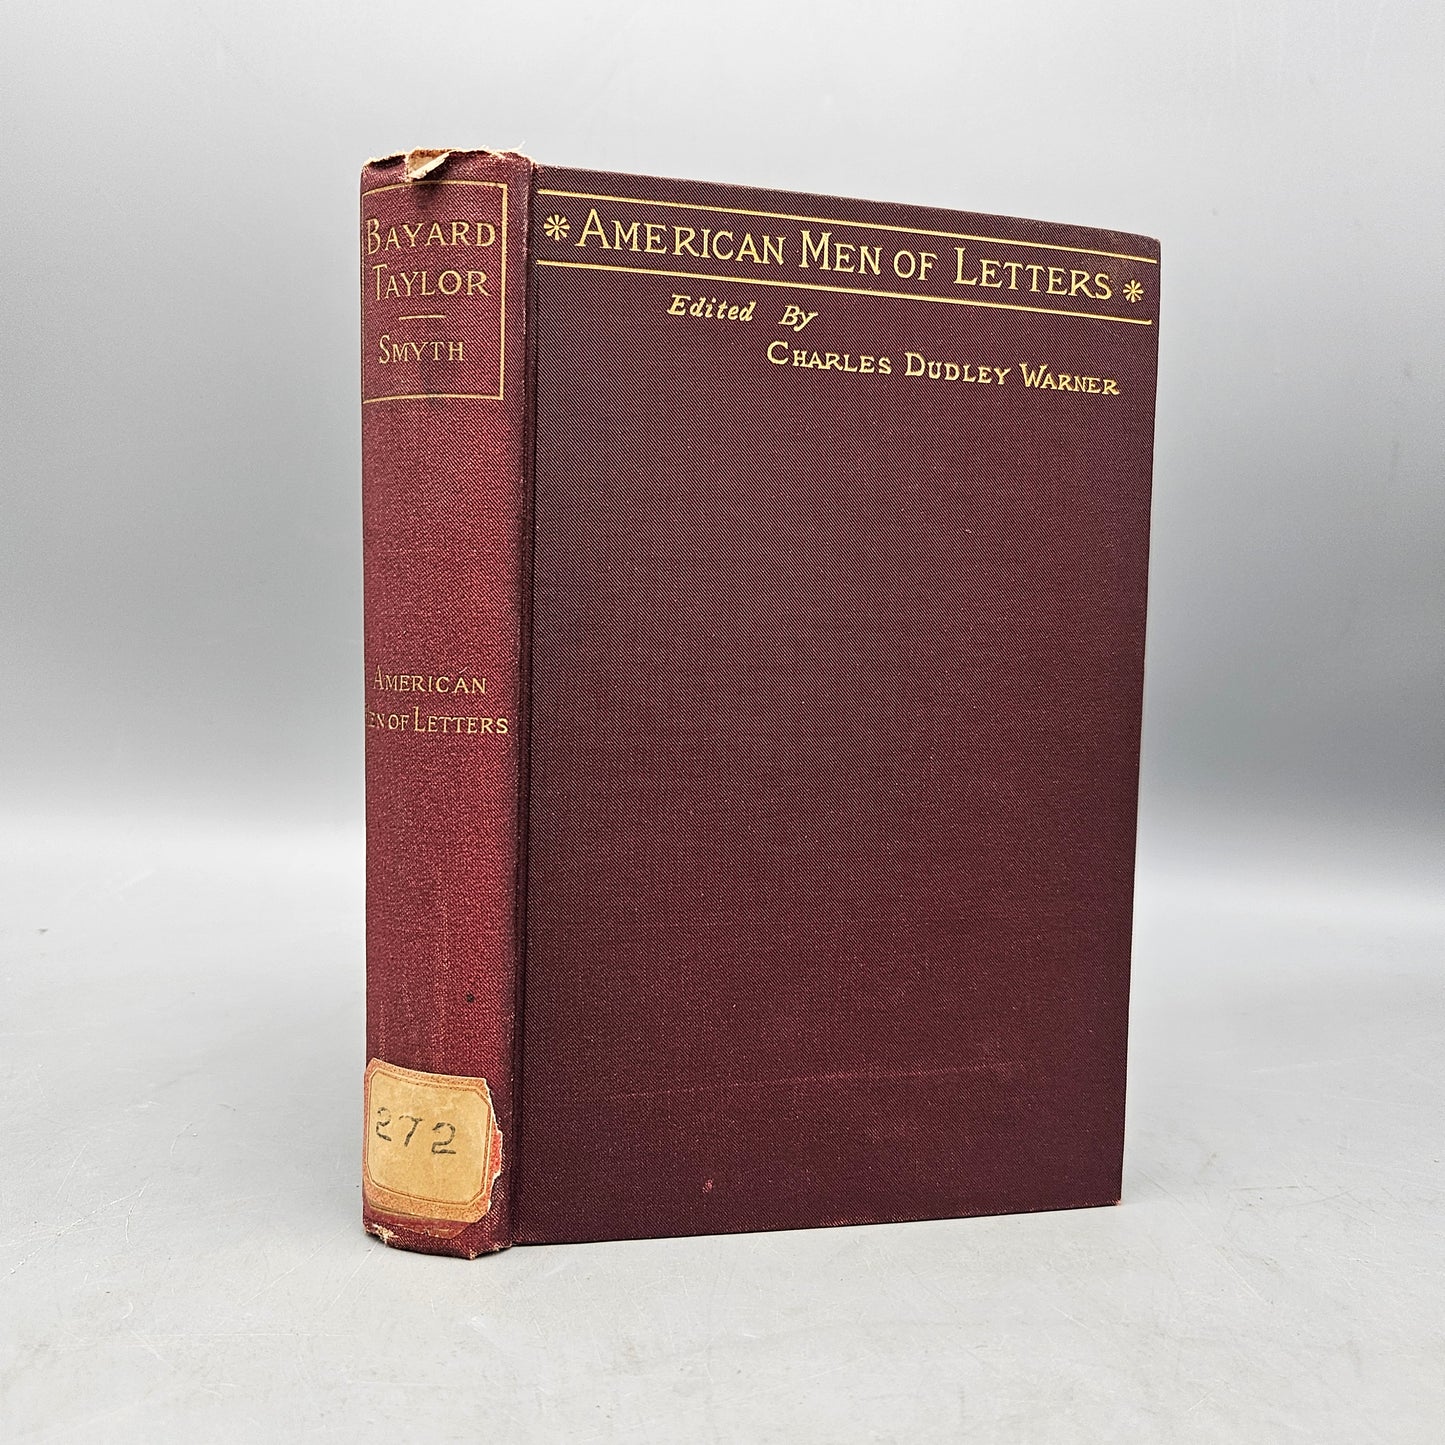 Book: American Men of Letters: Bayard Taylor. By Albert H. Smith. Houghton, Mifflin And Company, Boston, 1896